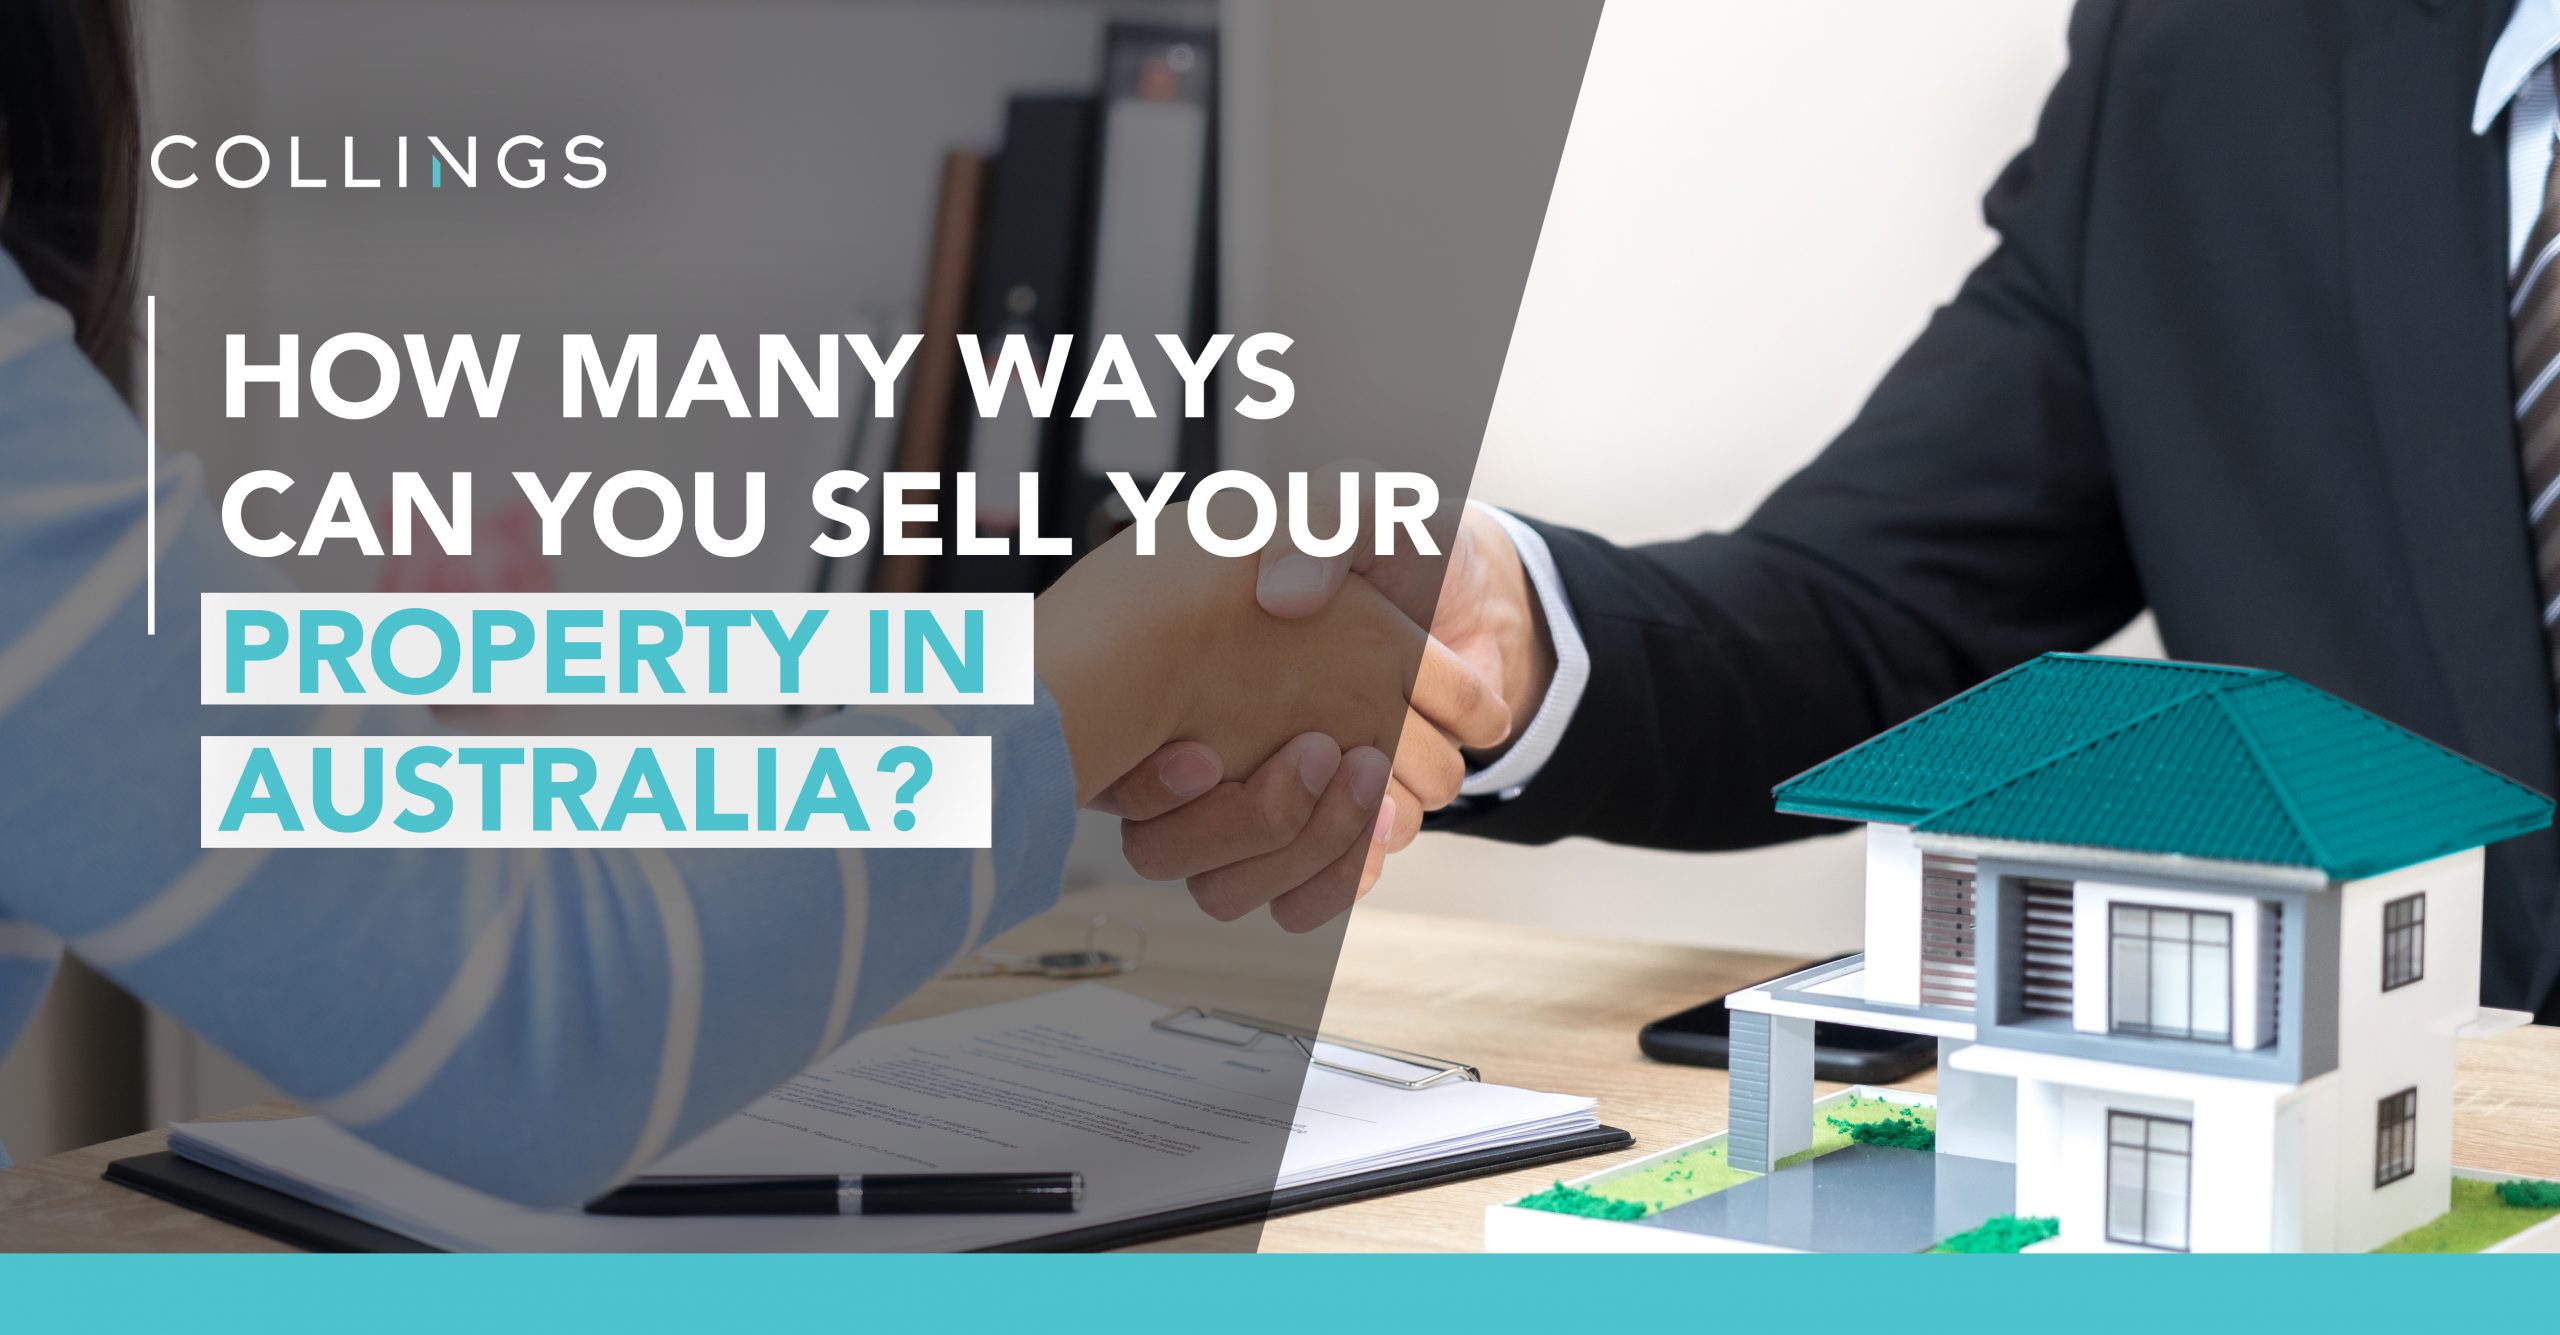 How many ways can you sell your property